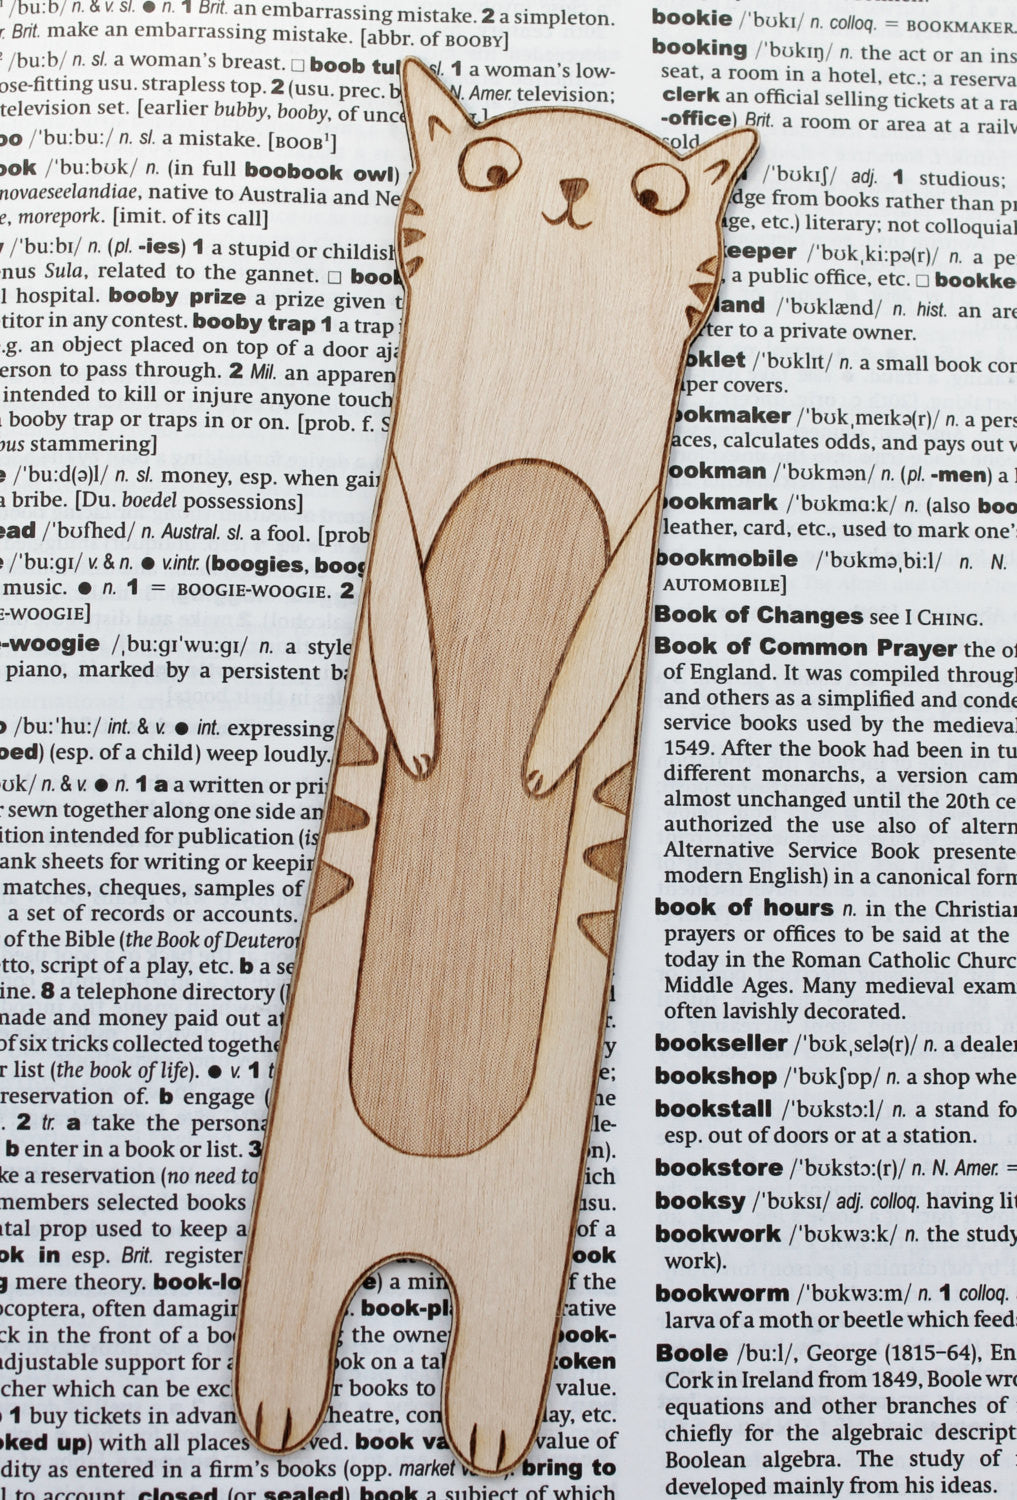 Sneaky Cat Bookmark Wooden Engraved